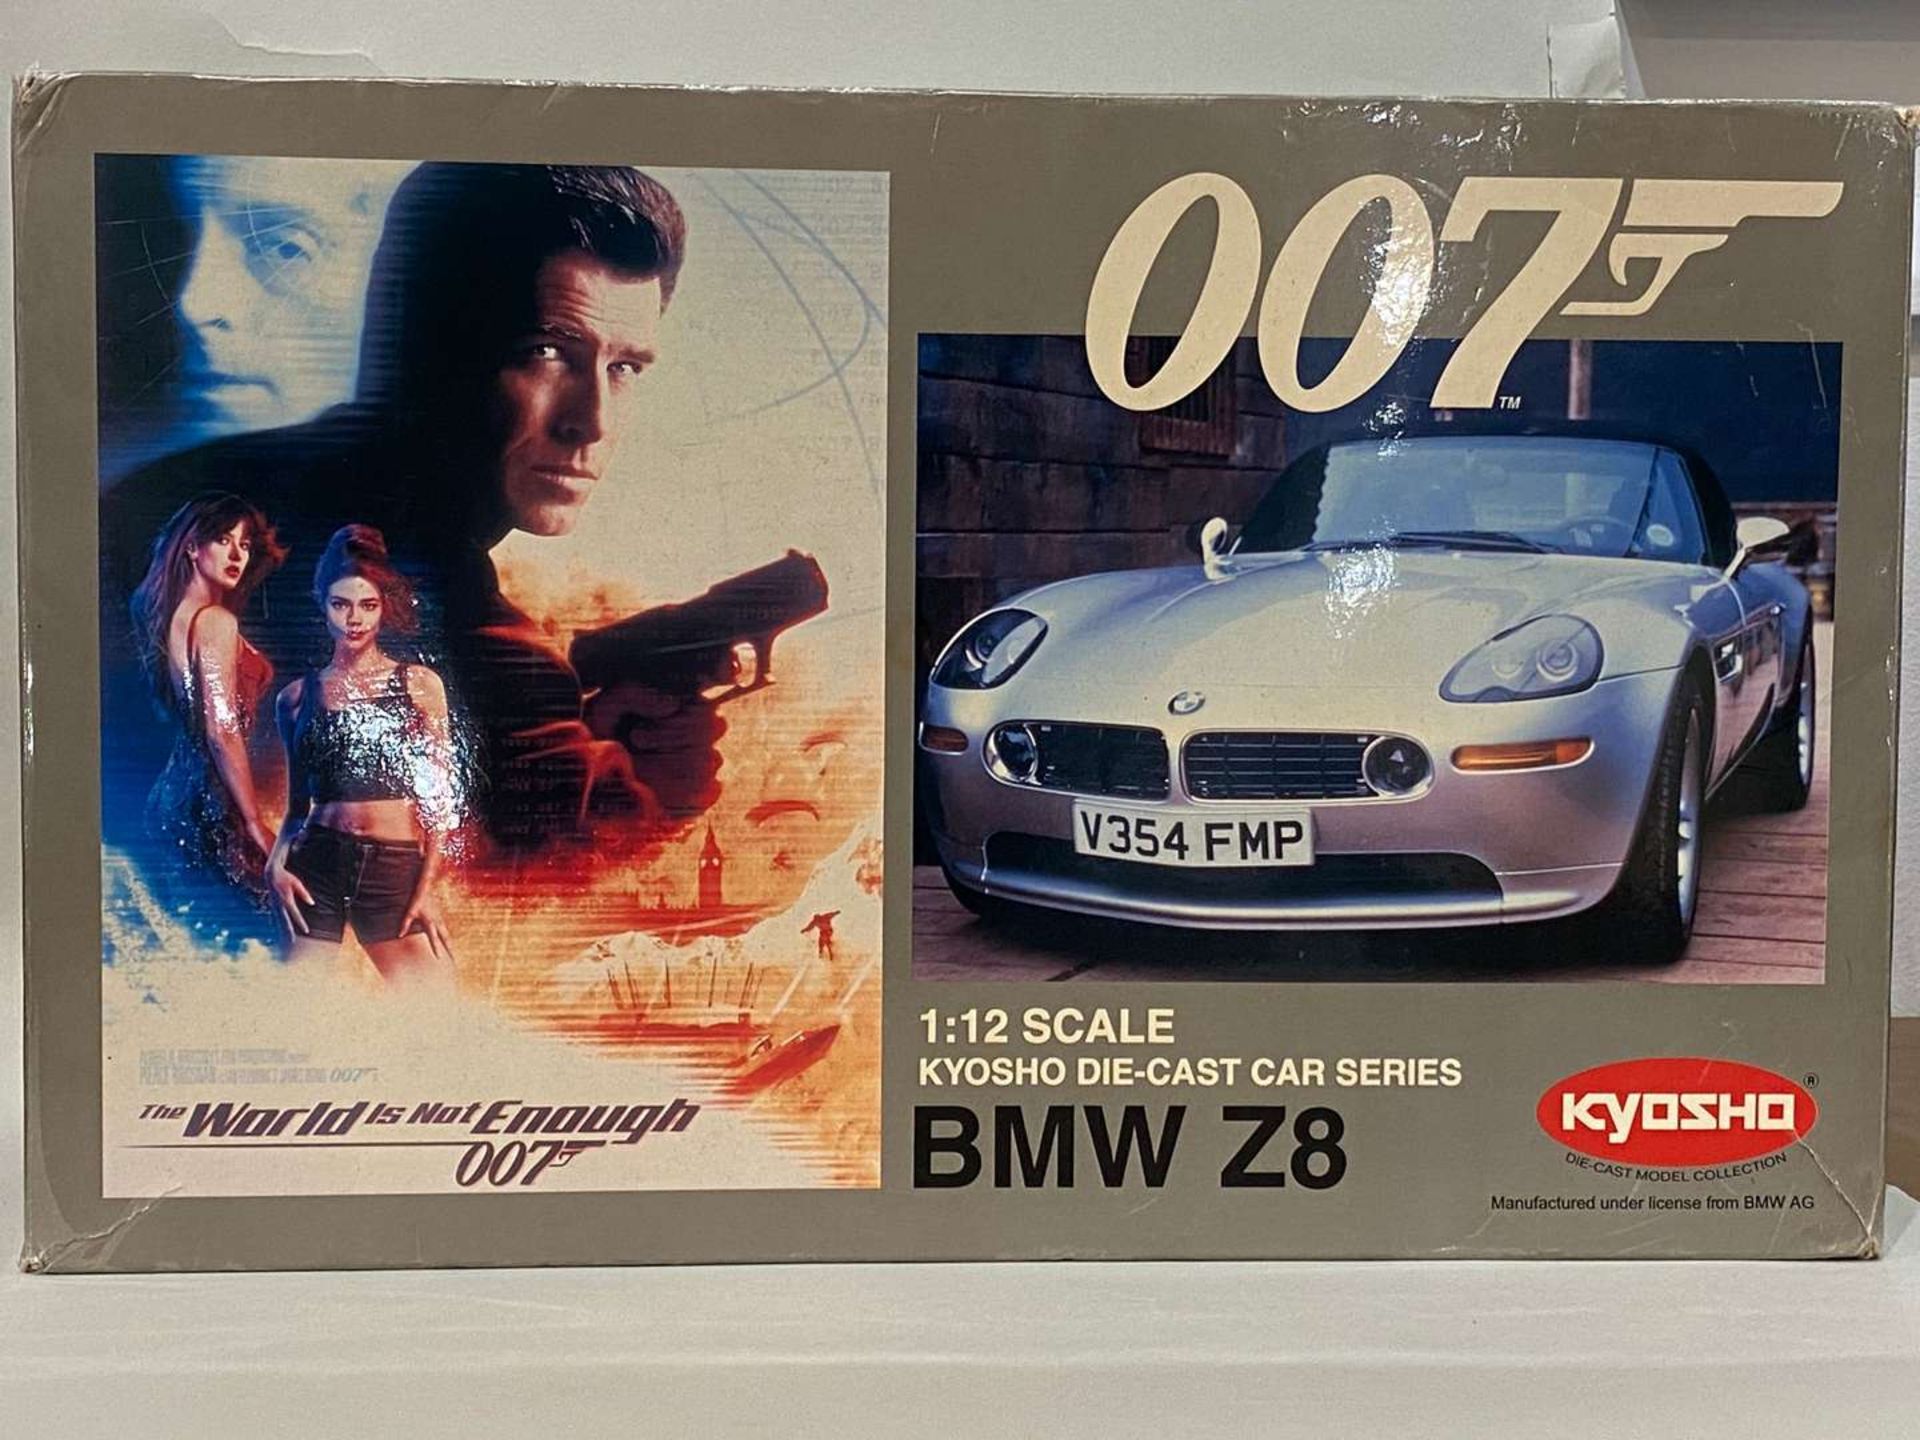 KYOSHO, BMW Z8, James Bond, 007, "The World is Not Enough" 1:12 - Image 7 of 7